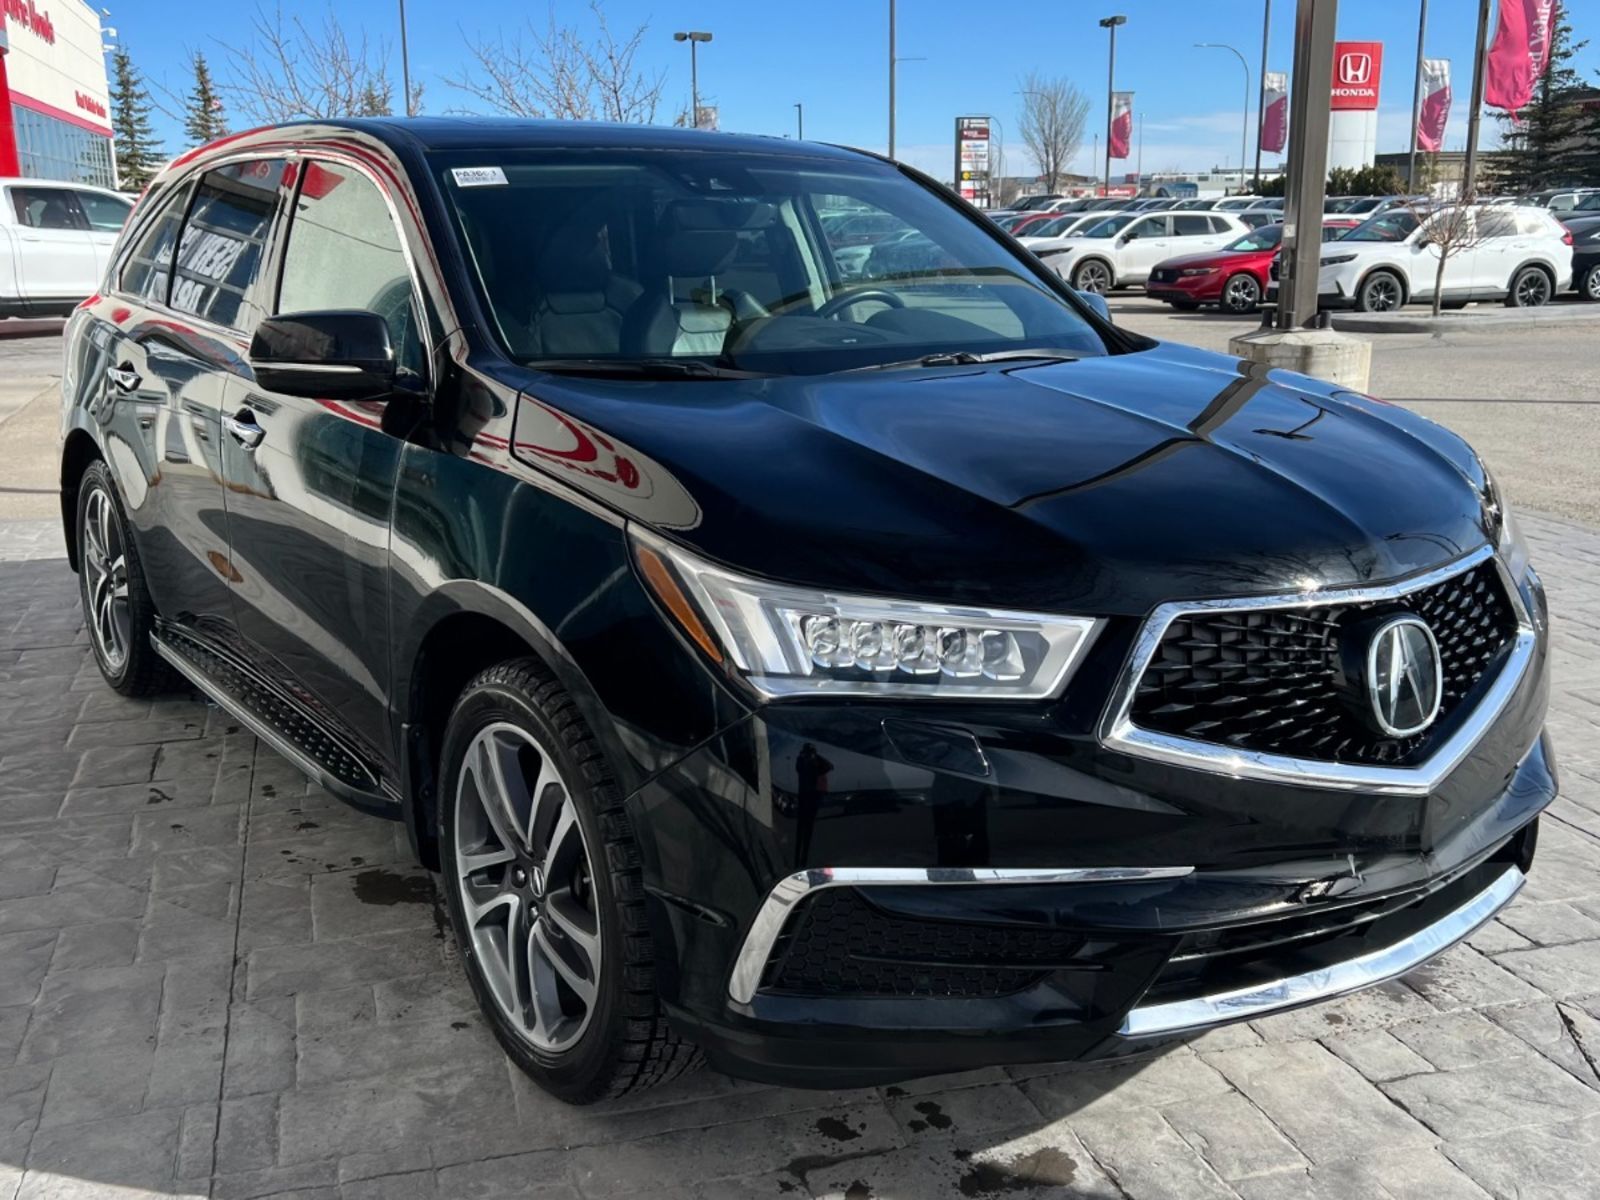 2018 Acura MDX NAVI: ACCIDENT FREE, FULLY LOADED